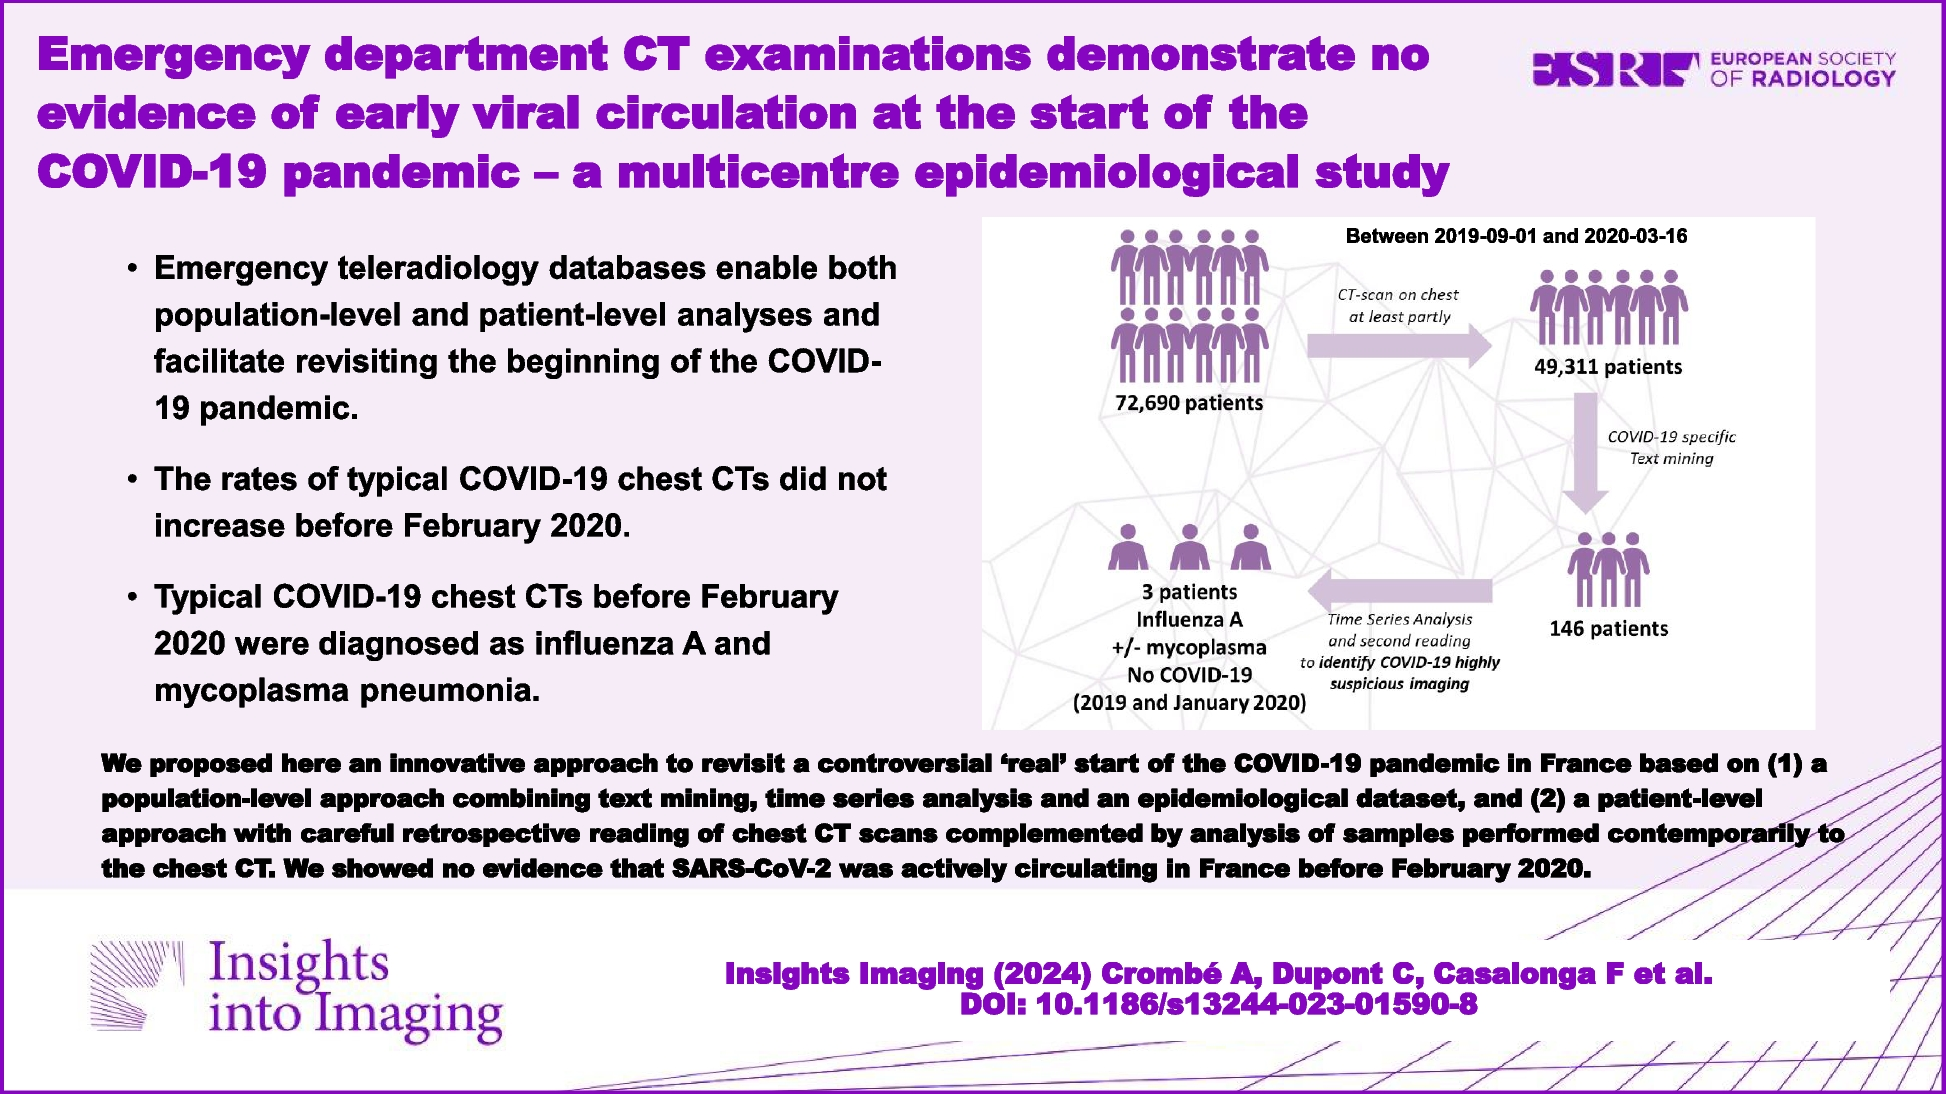 Emergency department CT examinations demonstrate no evidence of early viral circulation at the start of the COVID-19 pandemic—a multicentre epidemiological study